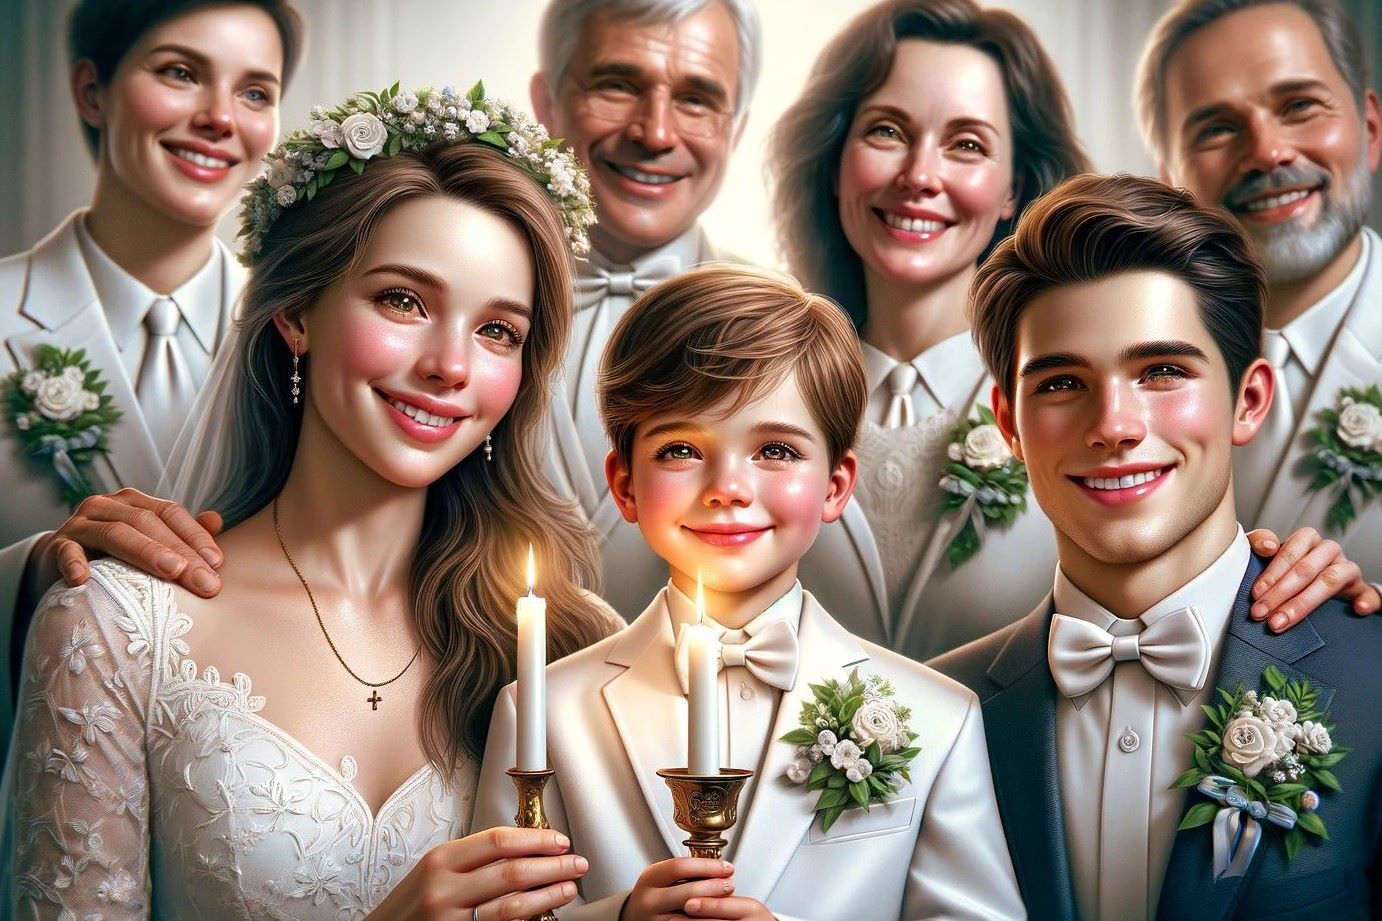 When Is First Communion In The Catholic Church